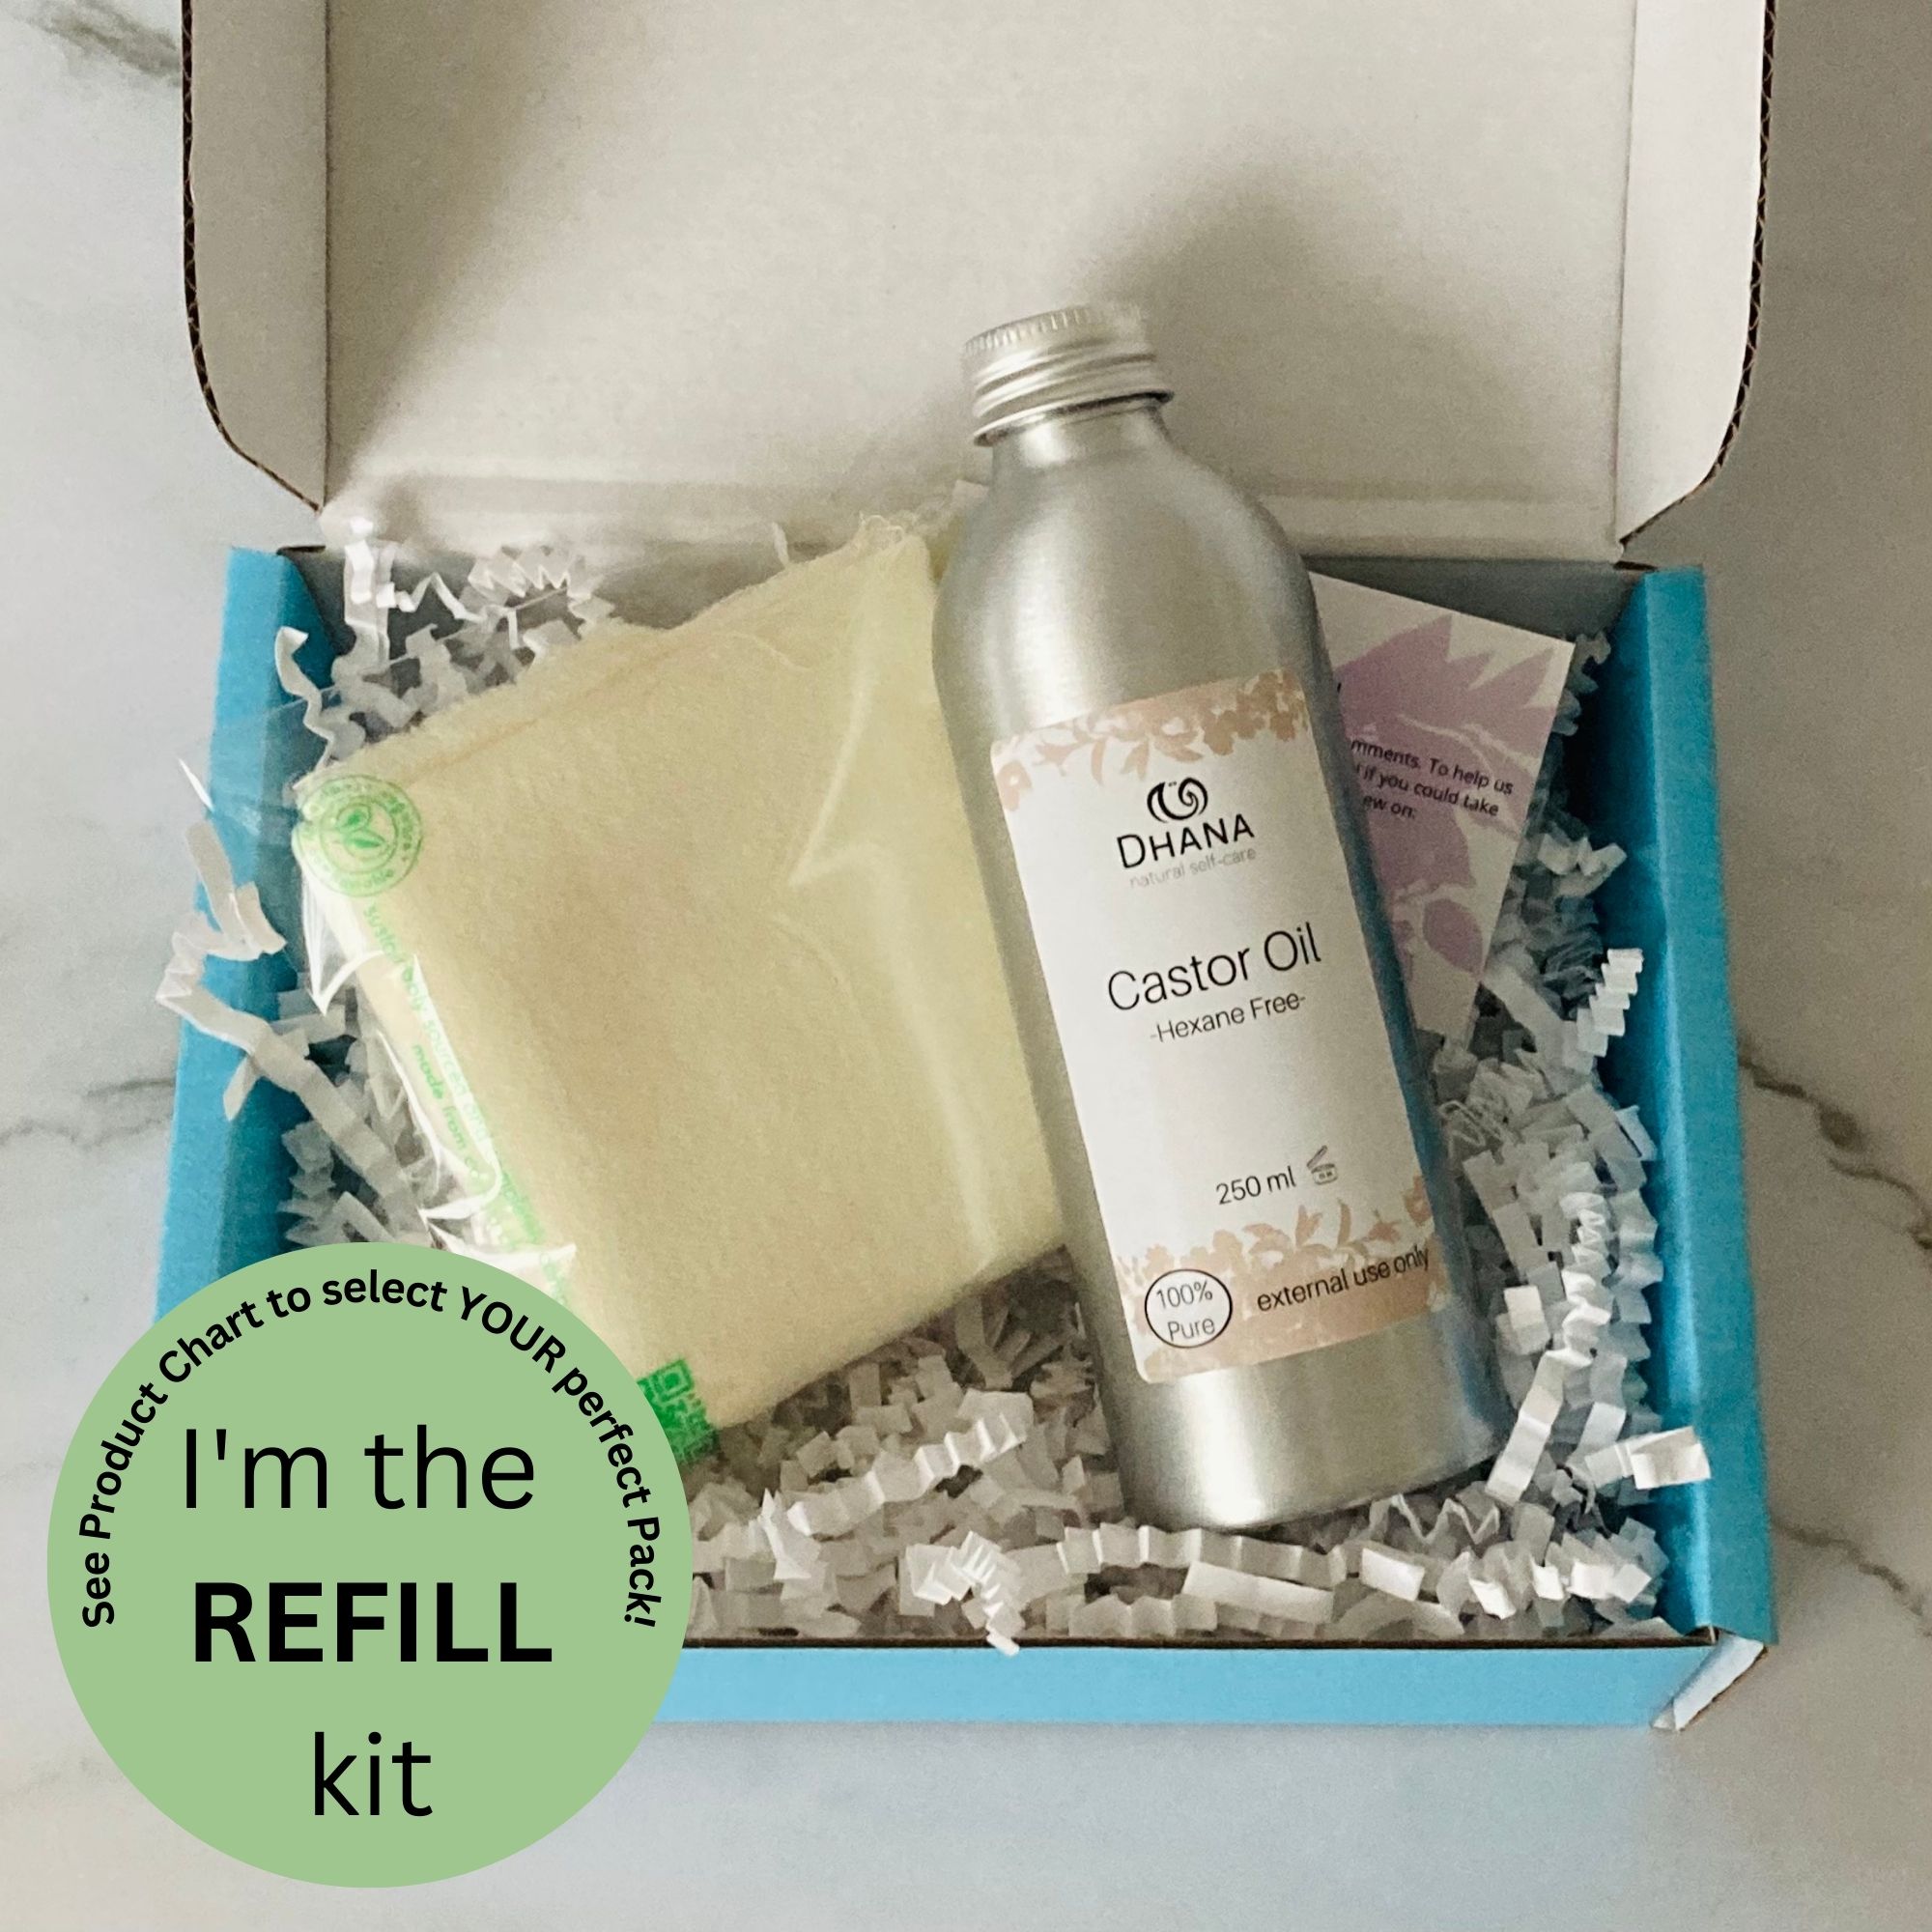 Refill Castor Oil Pack Kit (bottle of oil and flannel in a turquoise box)